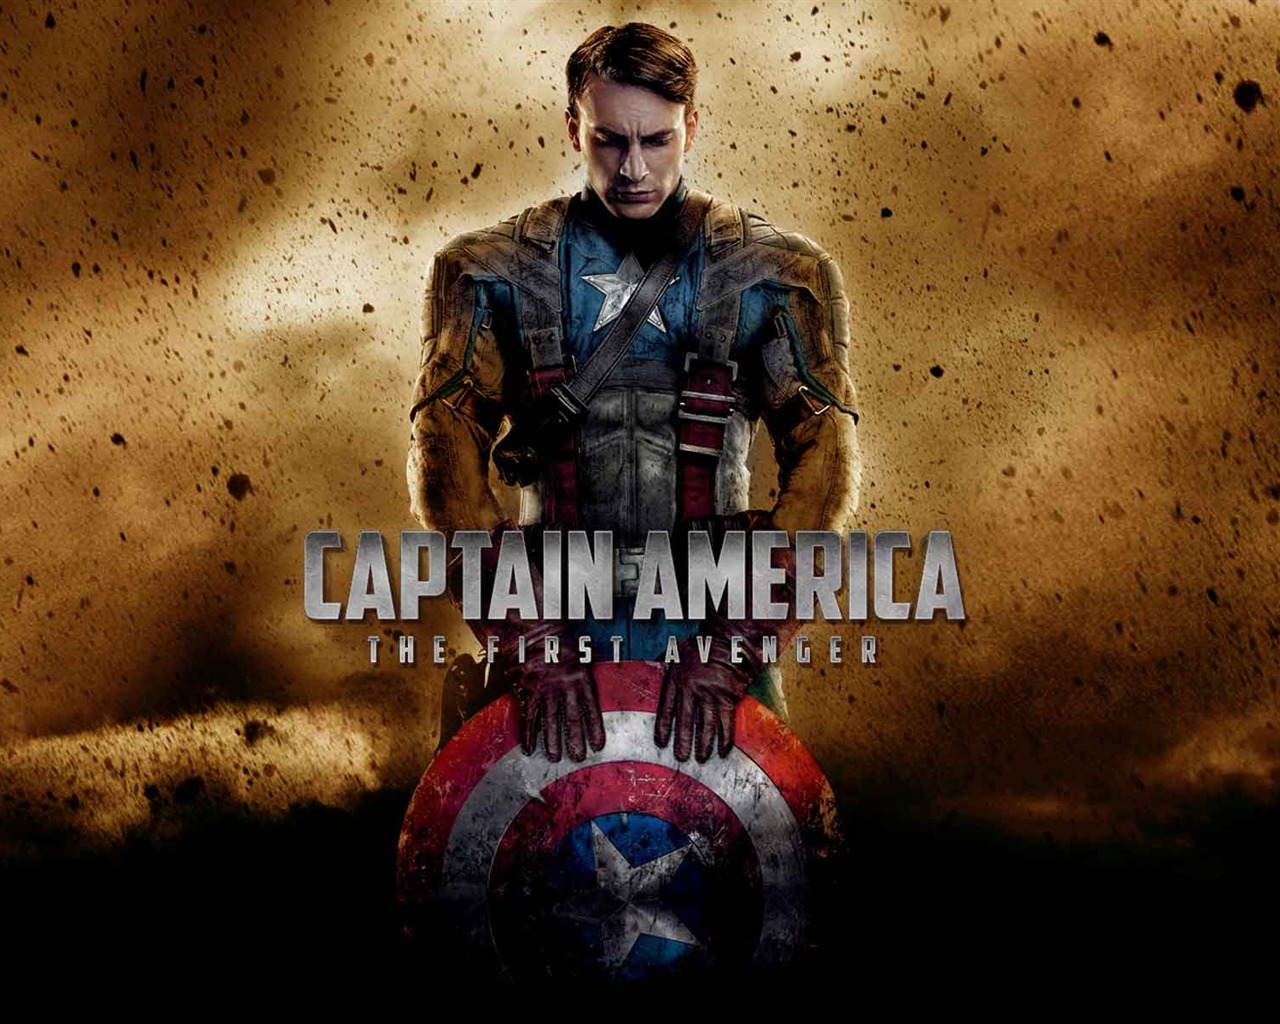 Captain America: The First Avenger wallpapers HD #7 - 1280x1024